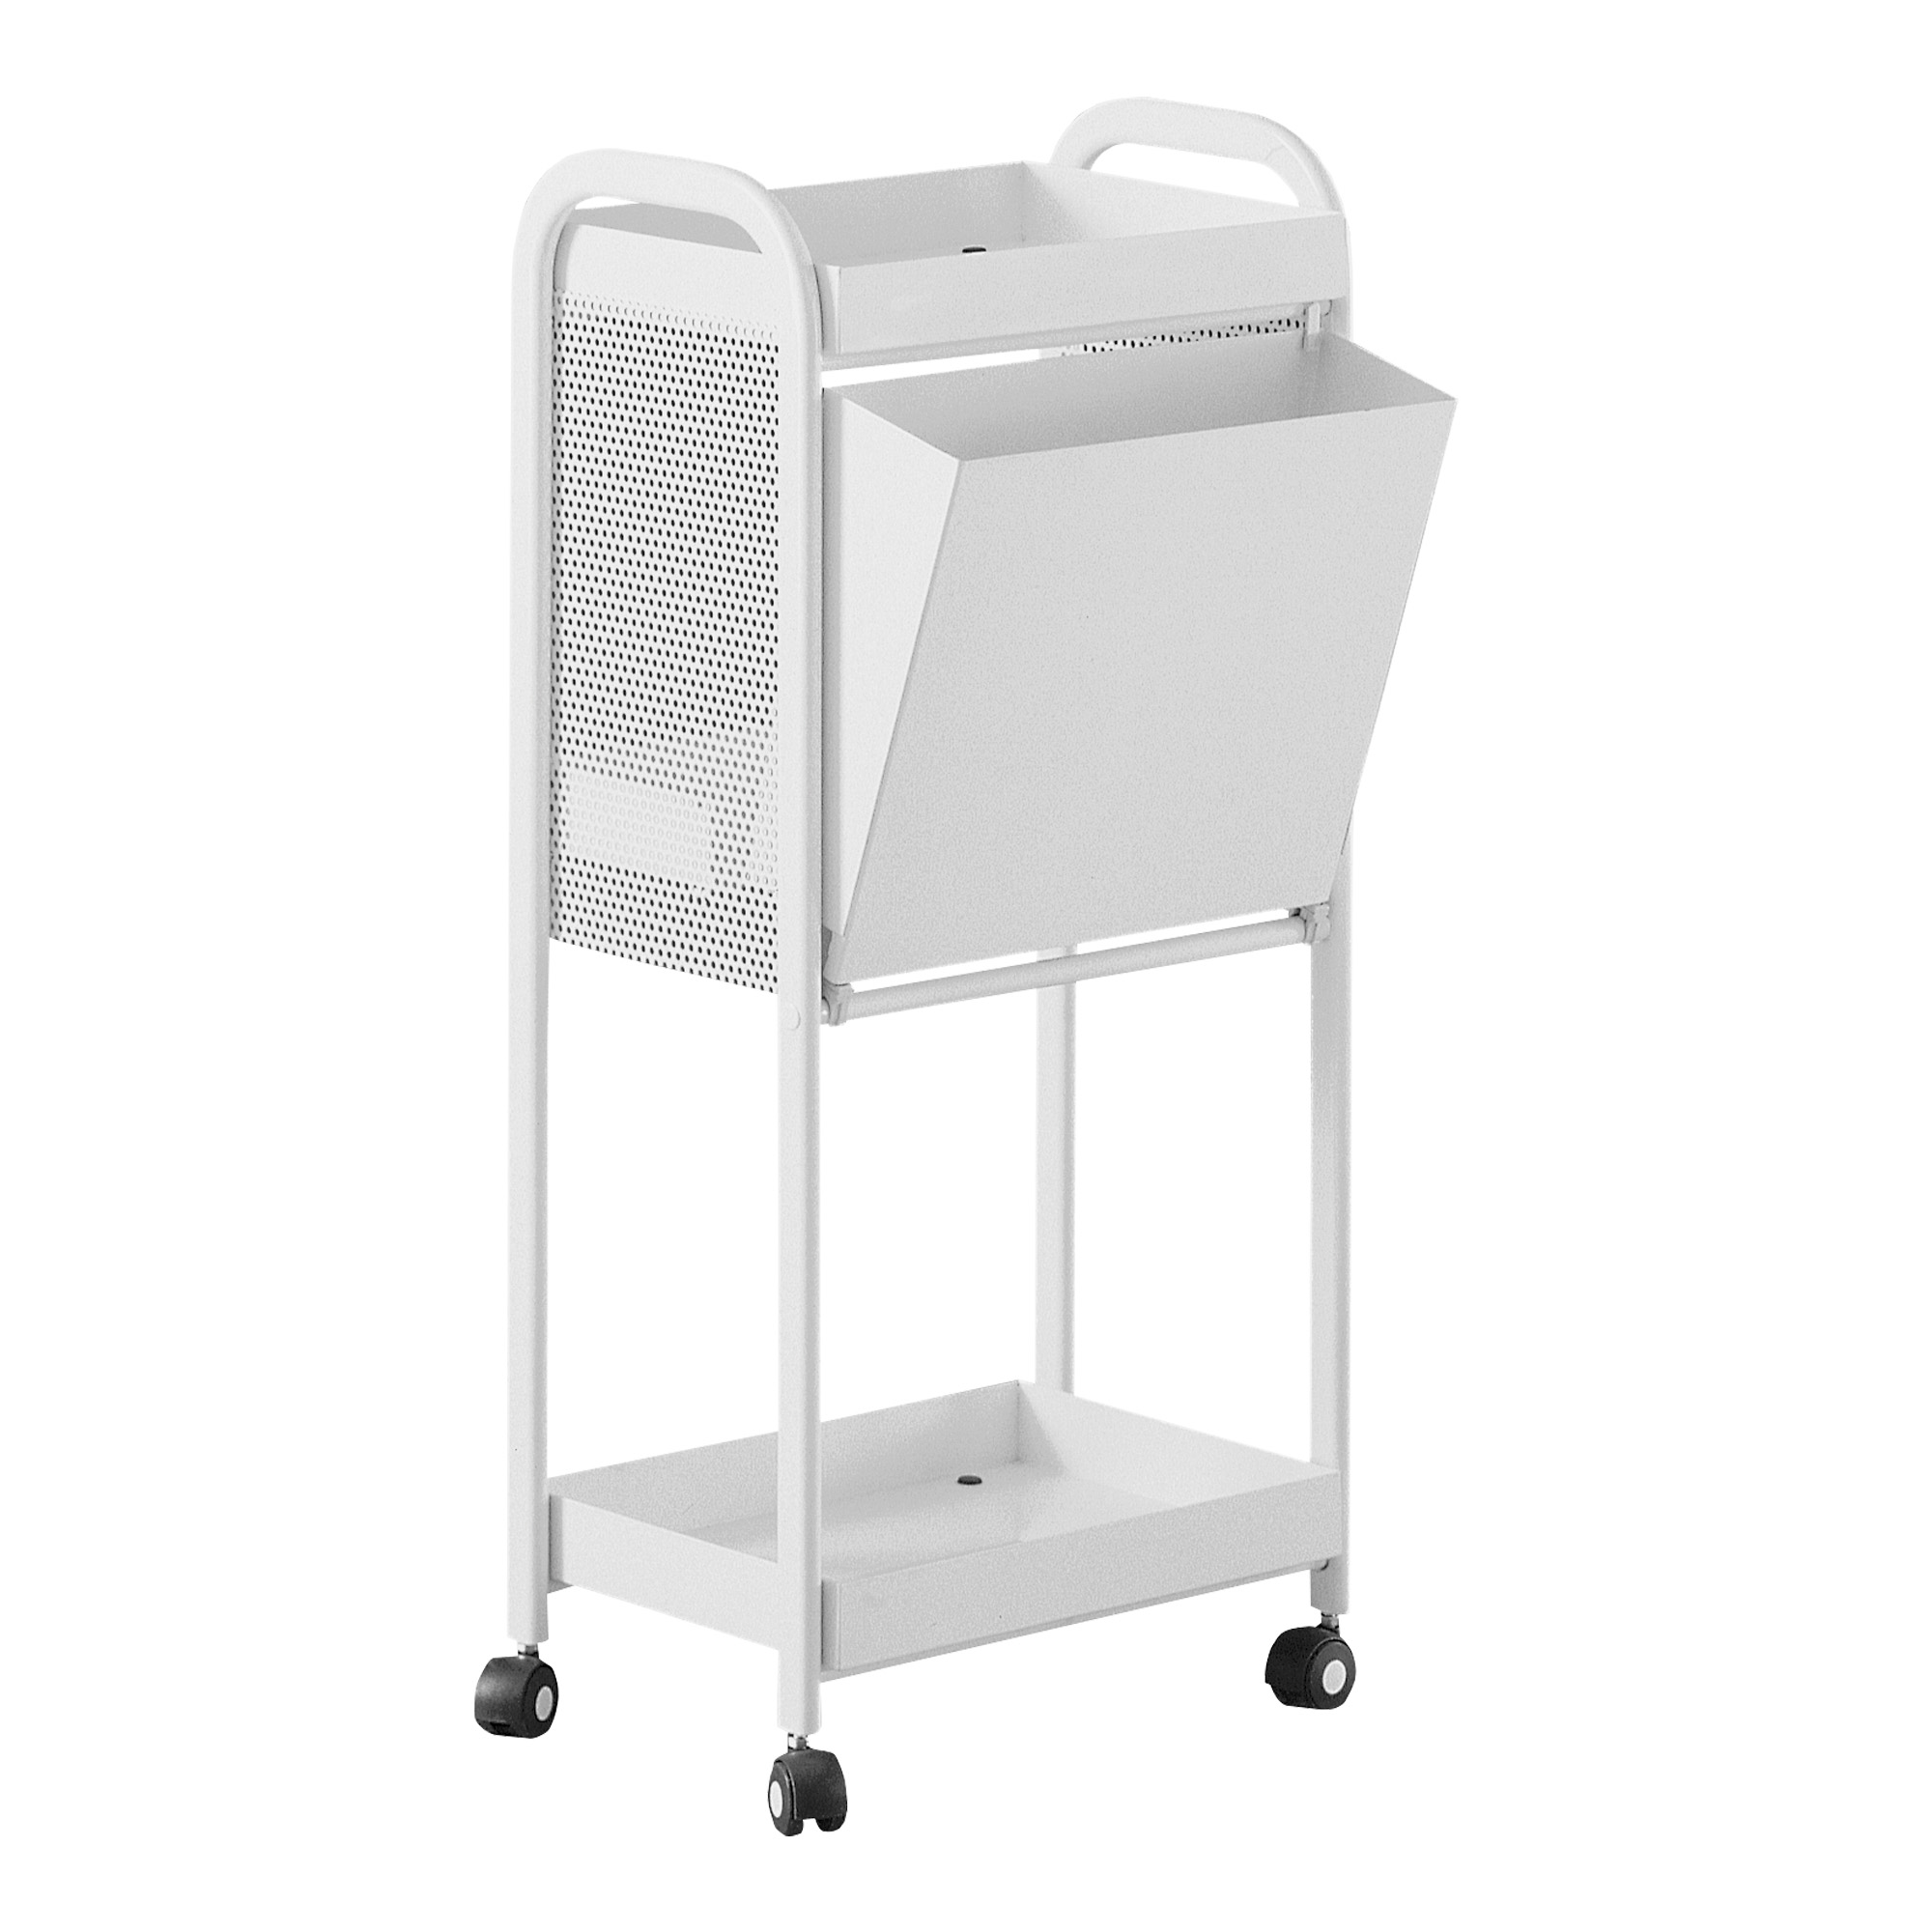 Steel trolley for hair removal 2 shelves and waste bin